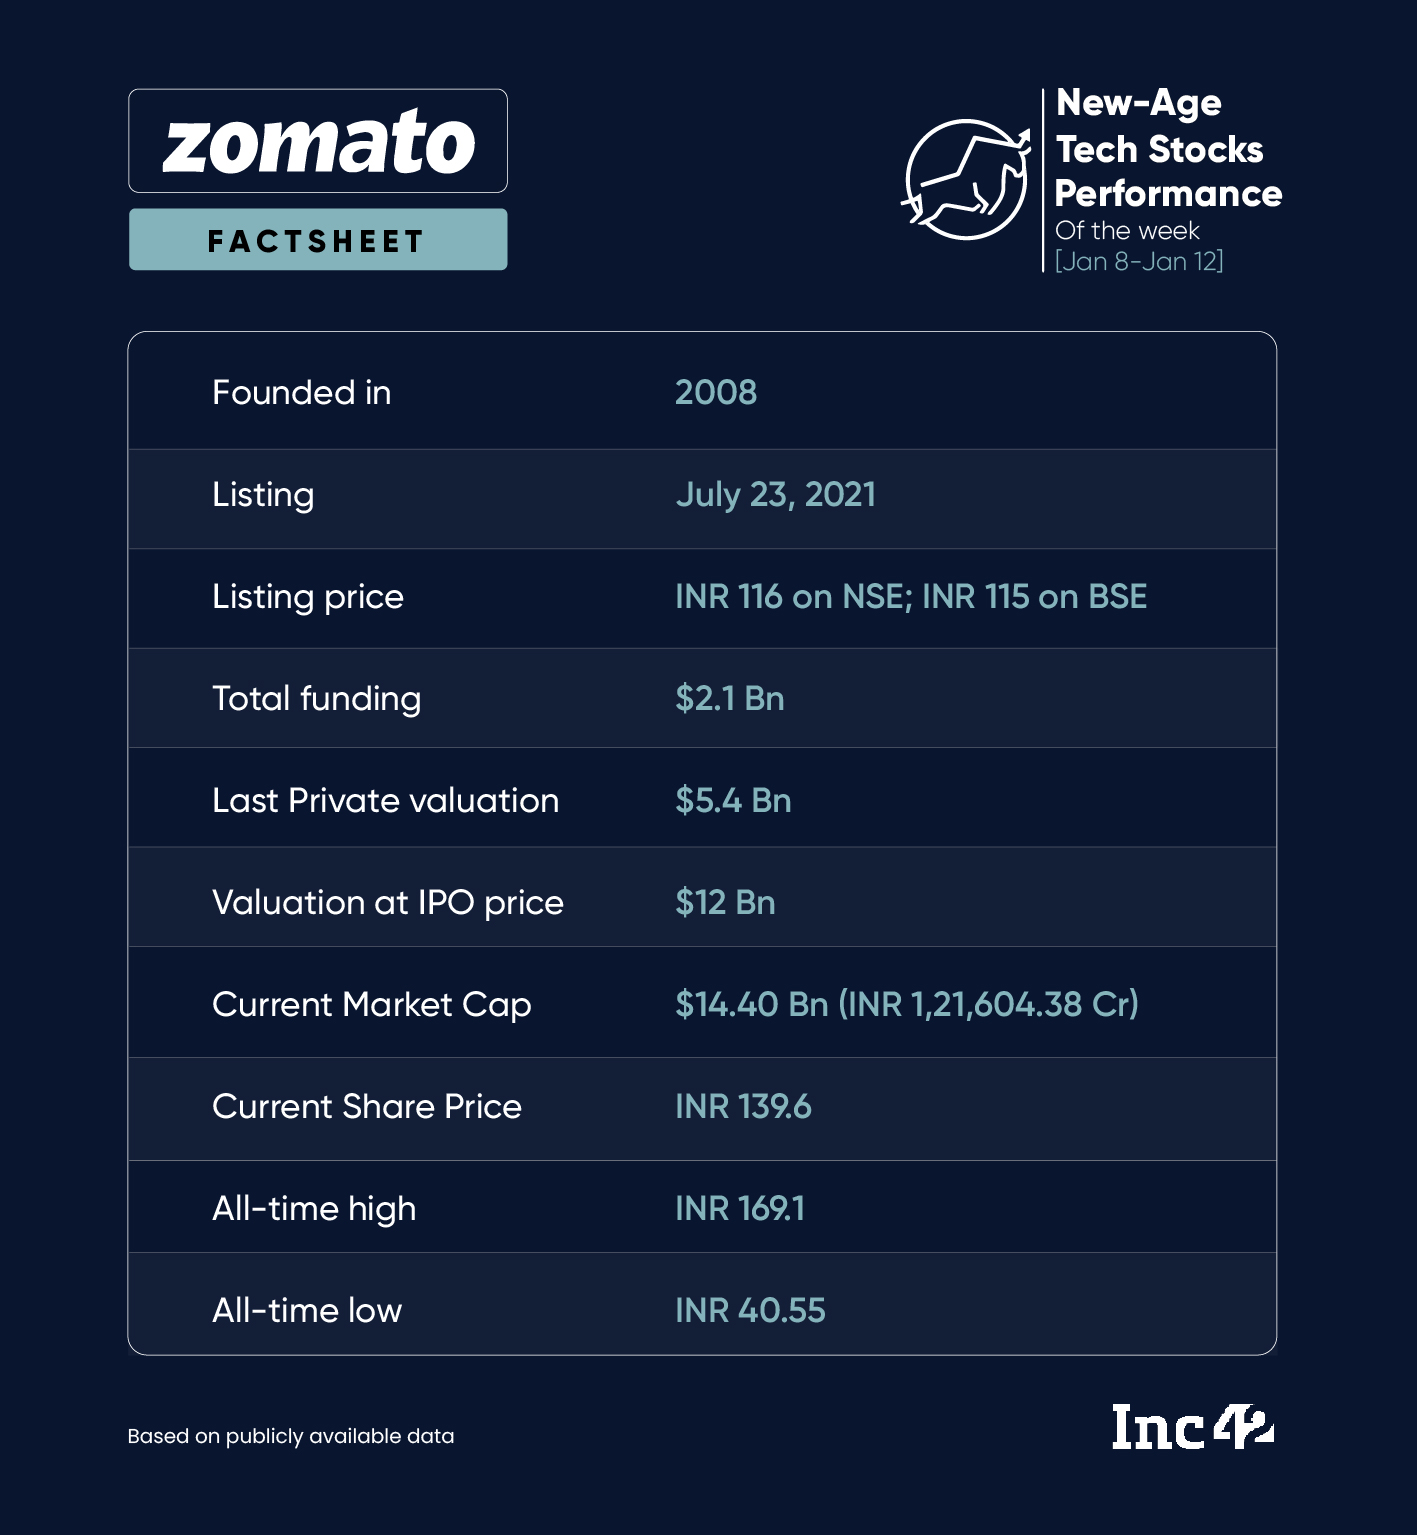 Blinkit’s Strong Show To Drive Zomato’s Growth